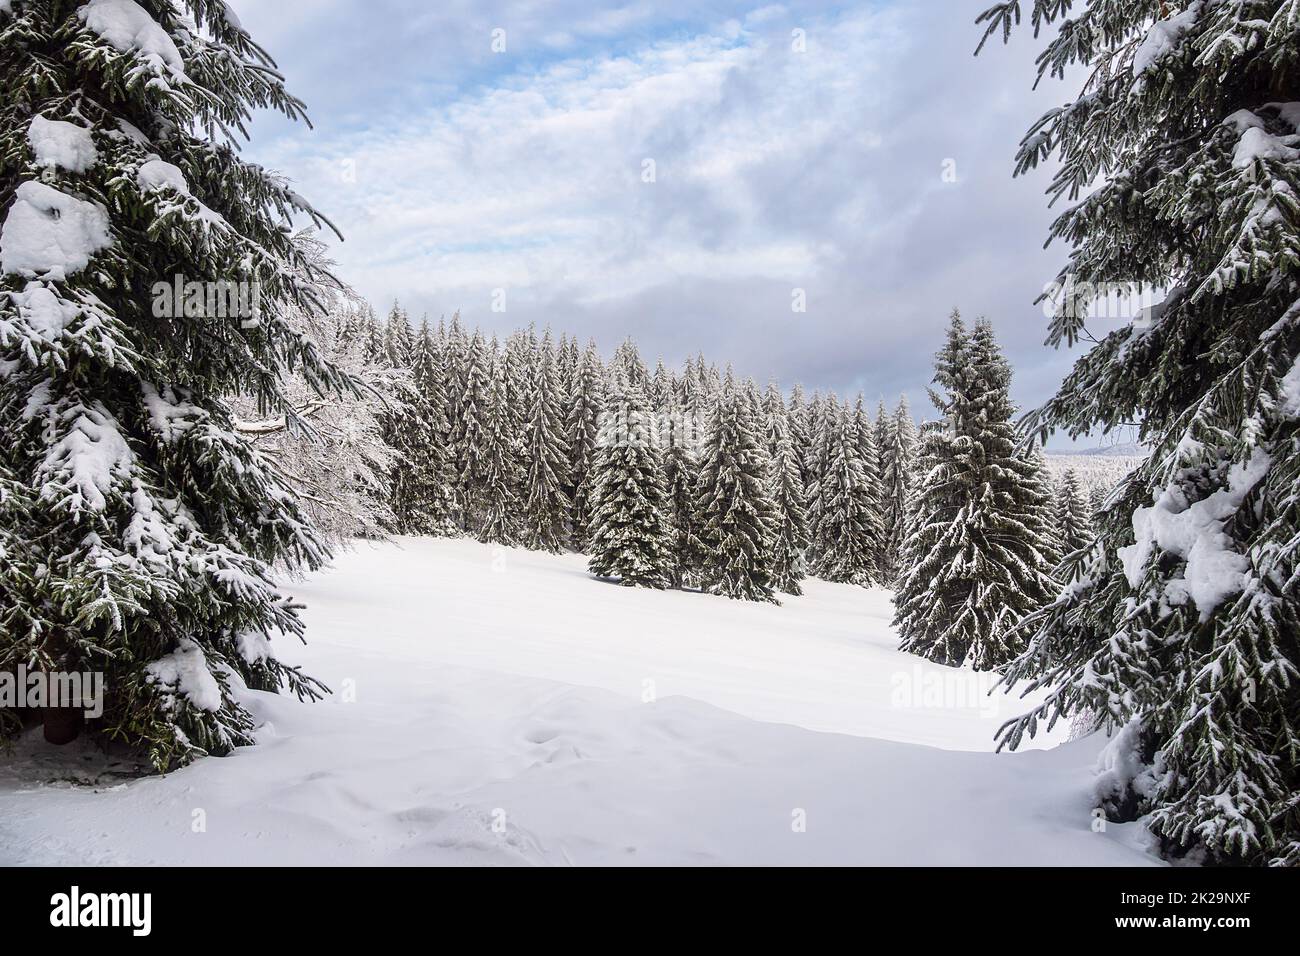 Landscape in winter time in the Thuringian Forest near Schmiedefeld am Rennsteig, Germany Stock Photo